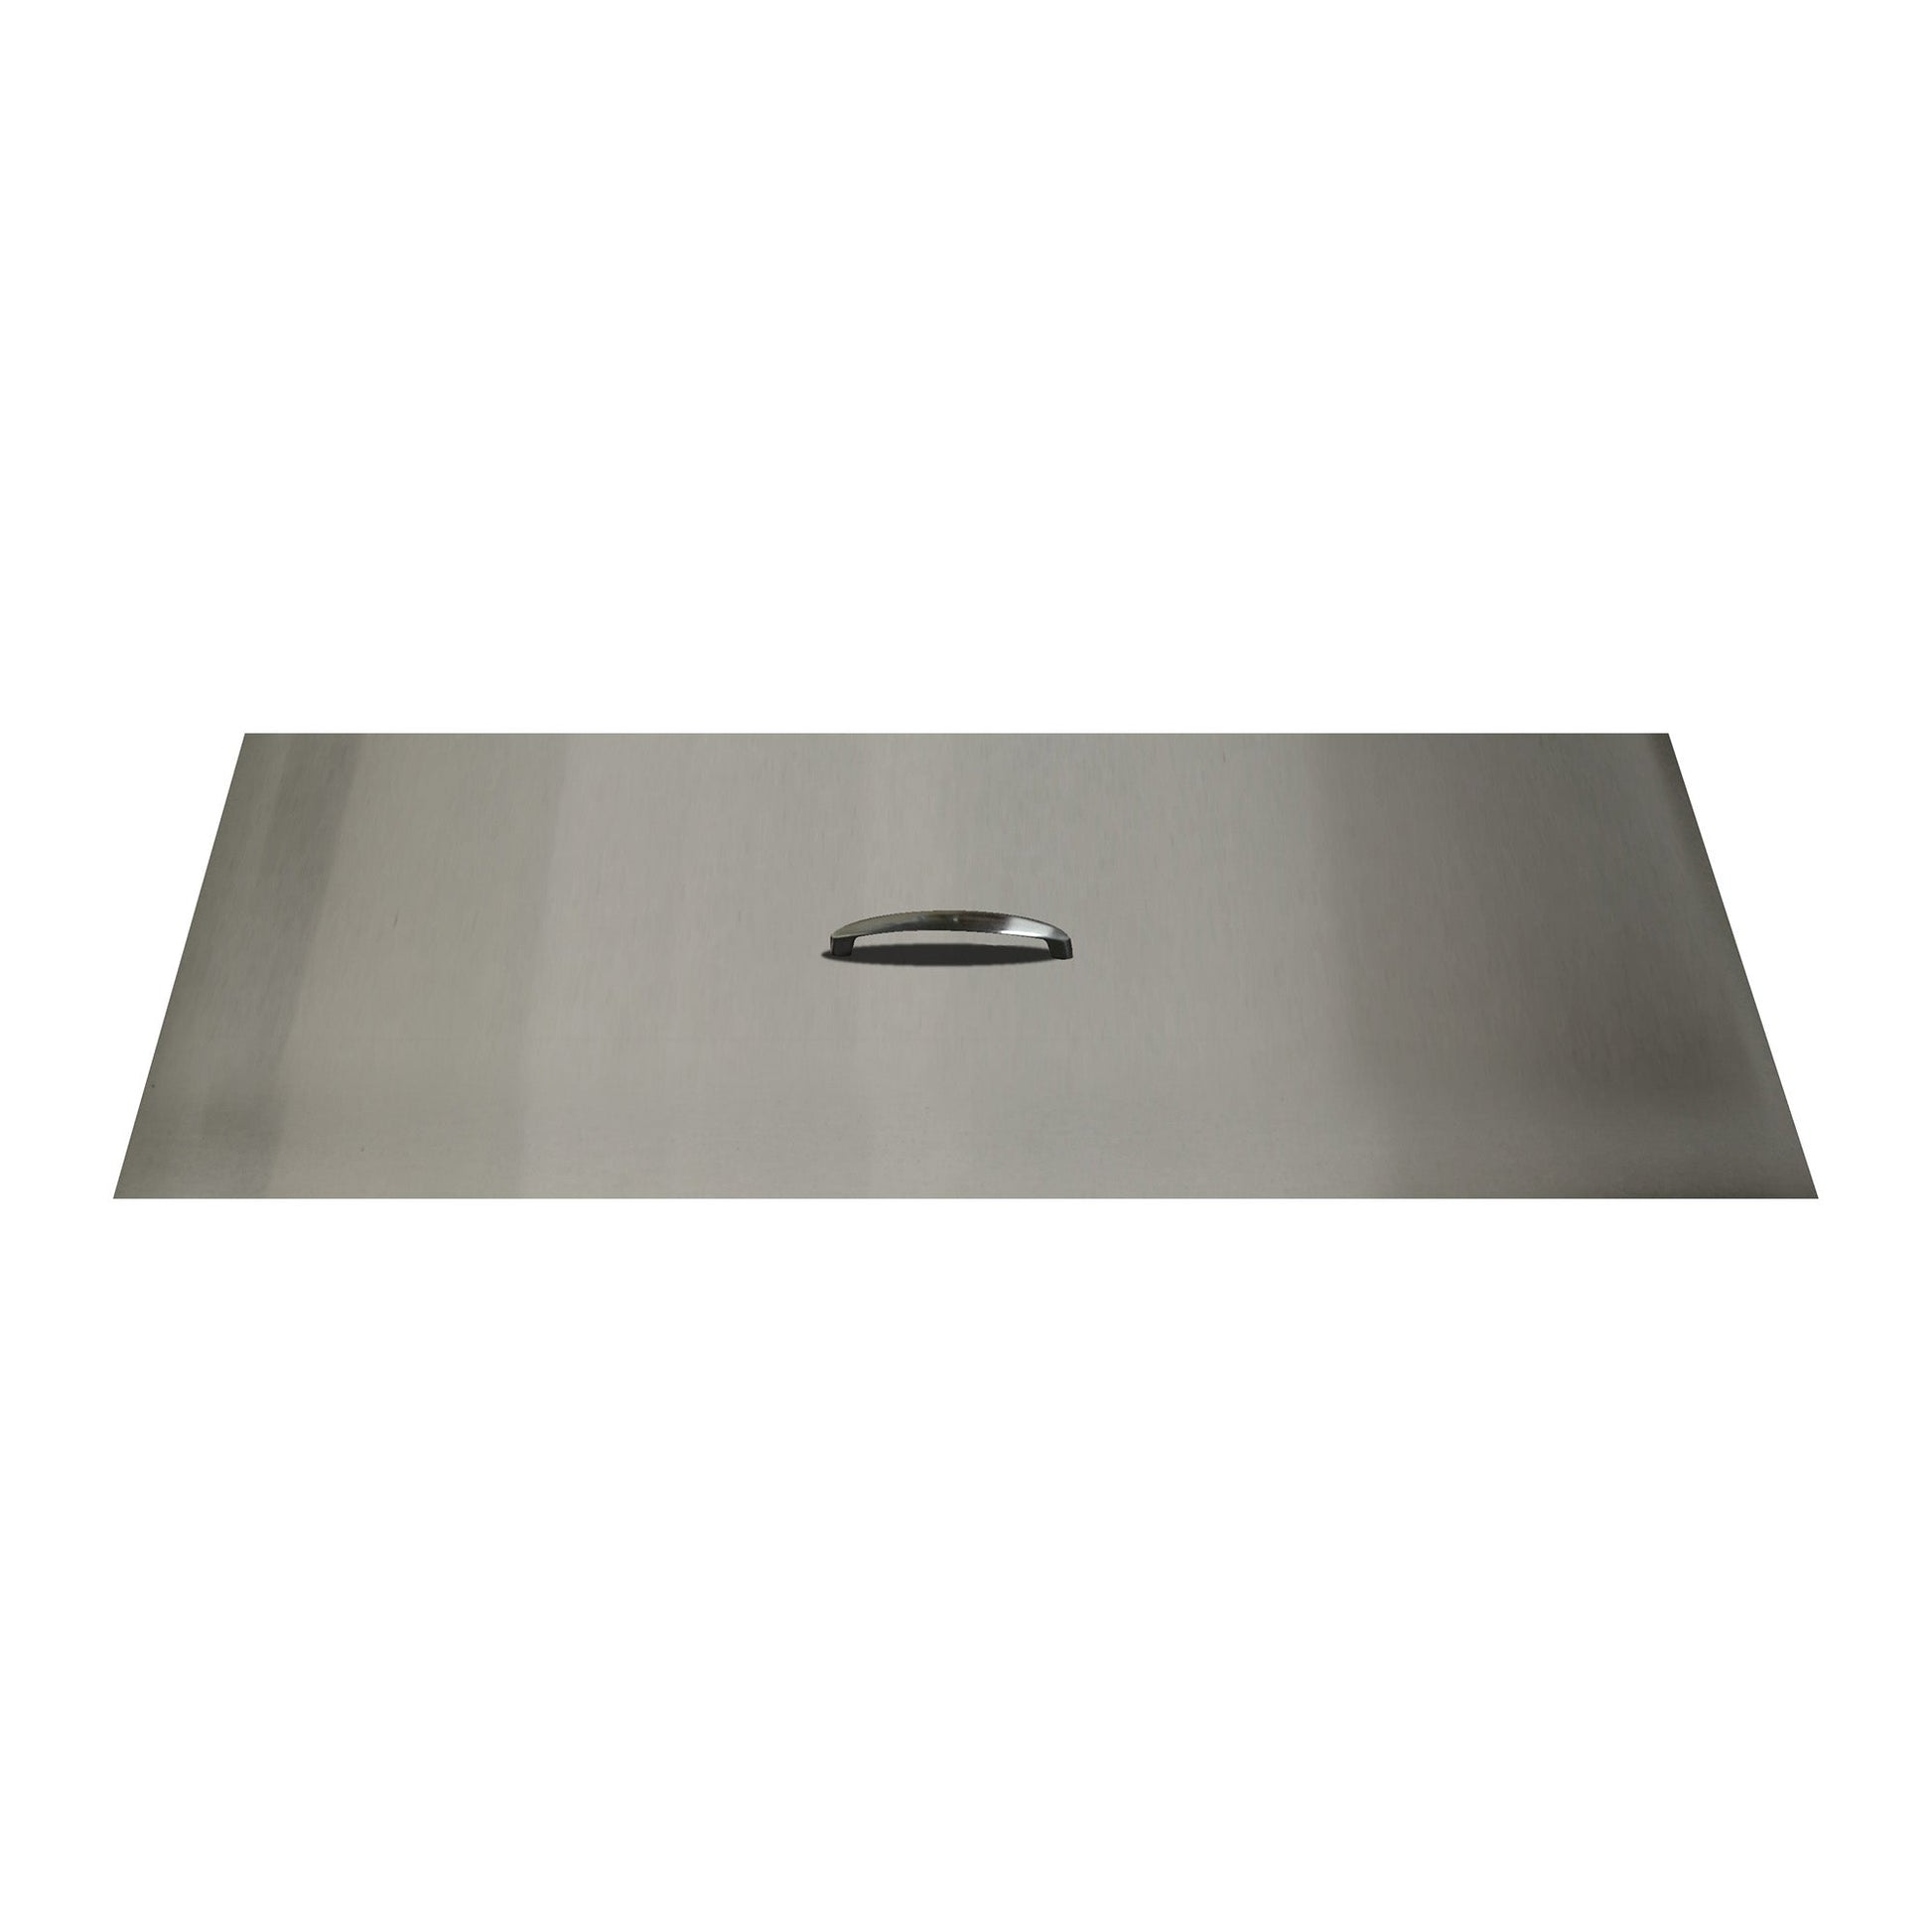 The Outdoor Plus 16" x 88" Stainless Steel Rectangular Fire Pit Lid Cover